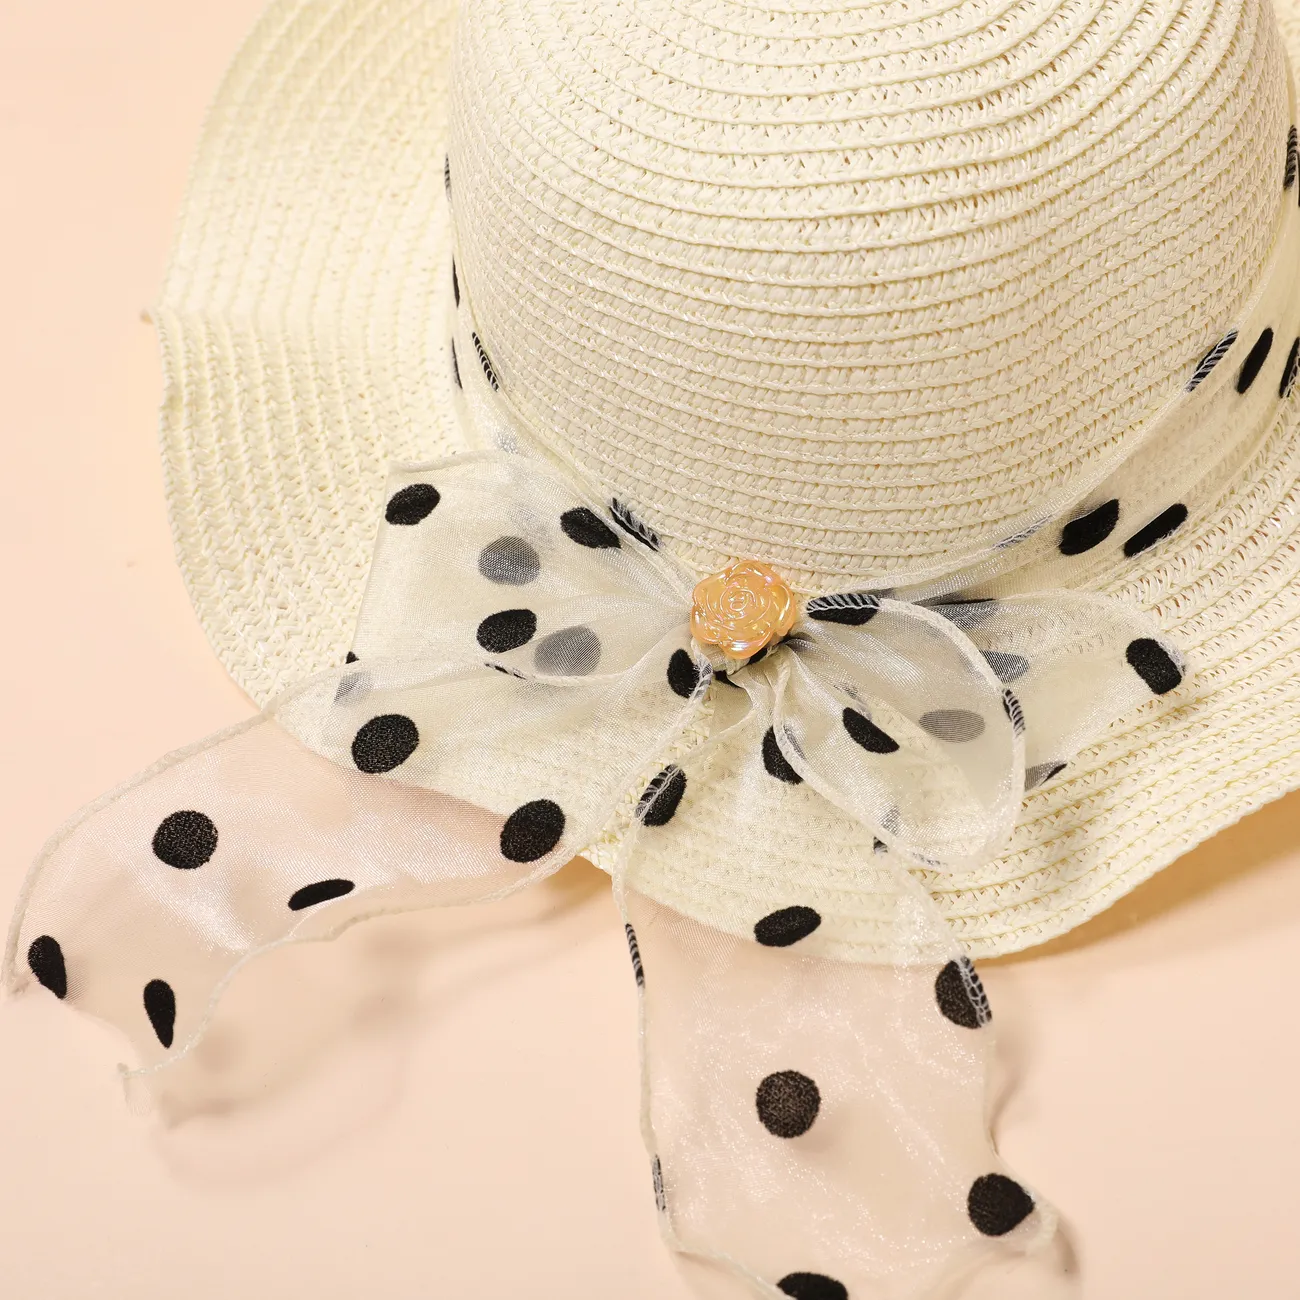 Summer Girls' Straw Hat with Polka Dot Ribbon for Beach and Sun Protection, Ages 2-5 Creamy White big image 1